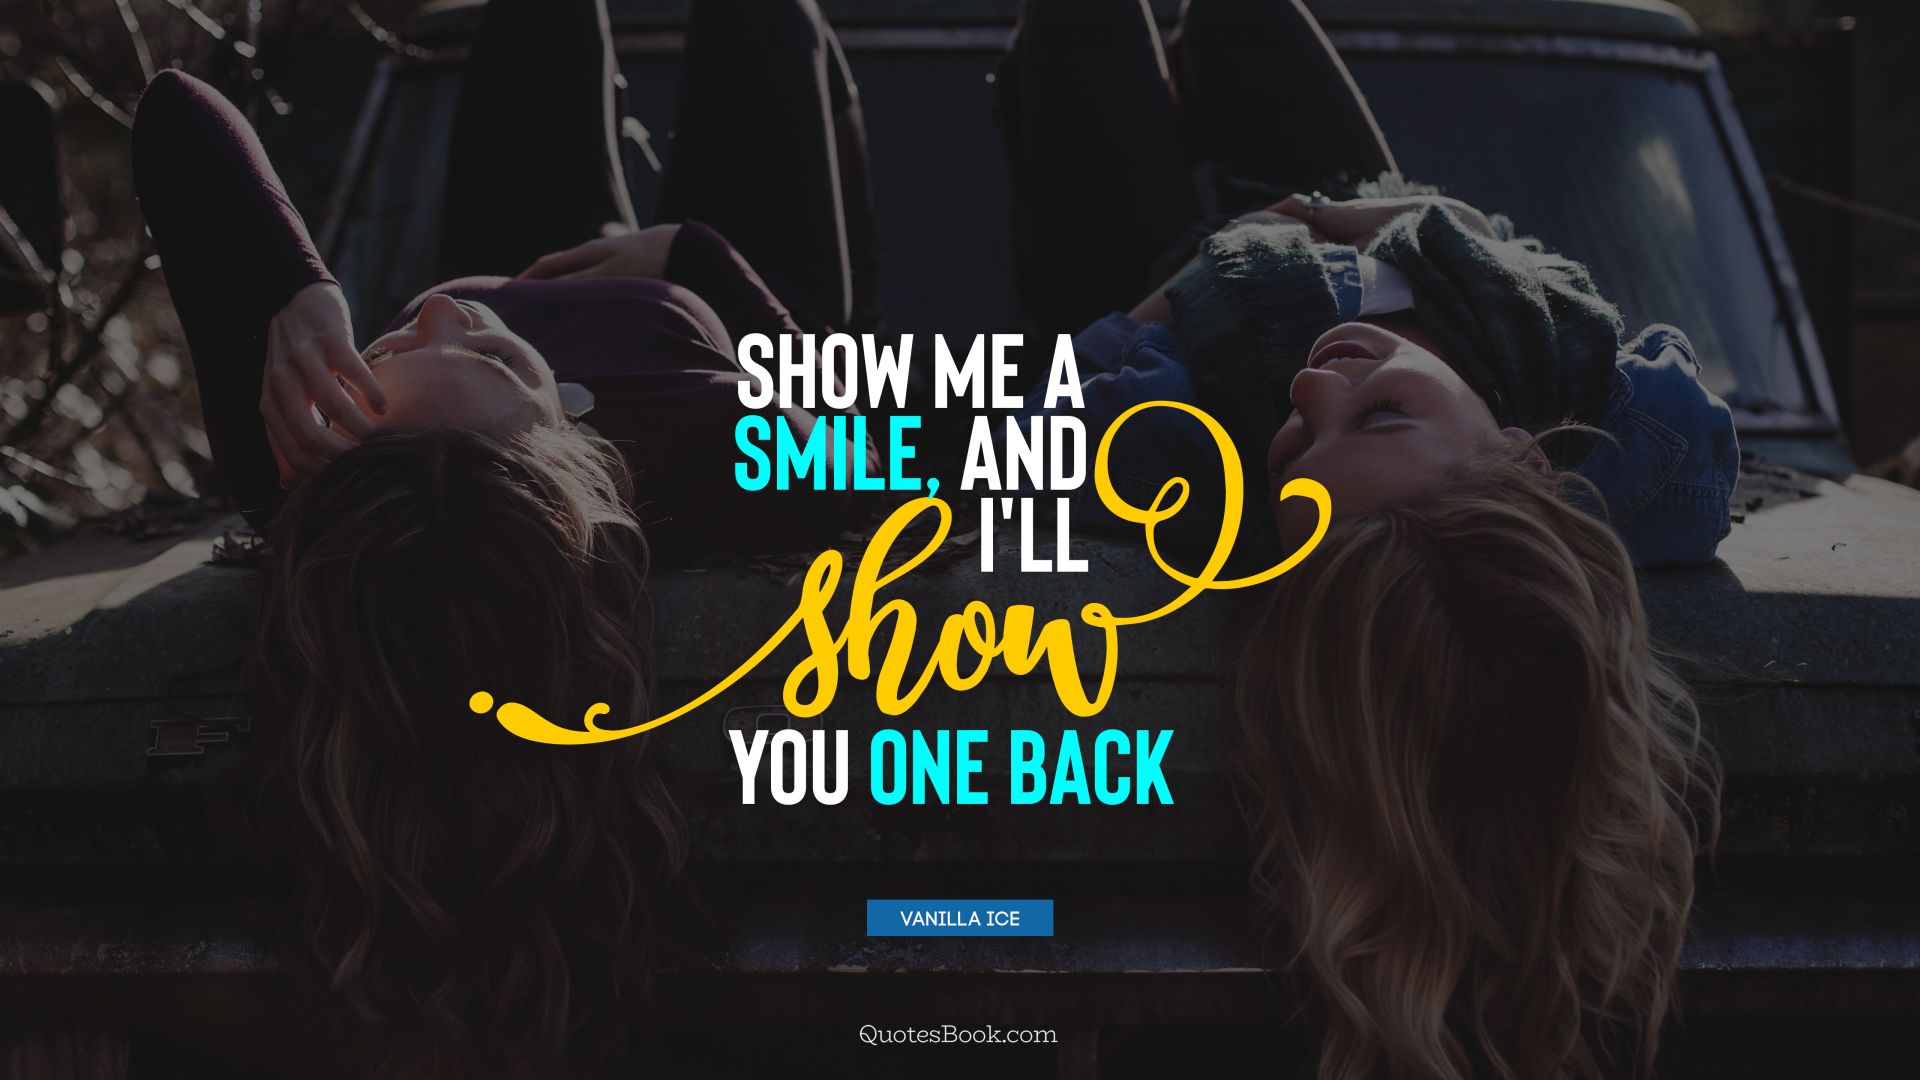 Show me a smile, and I'll show you one back. - Quote by Vanilla Ice